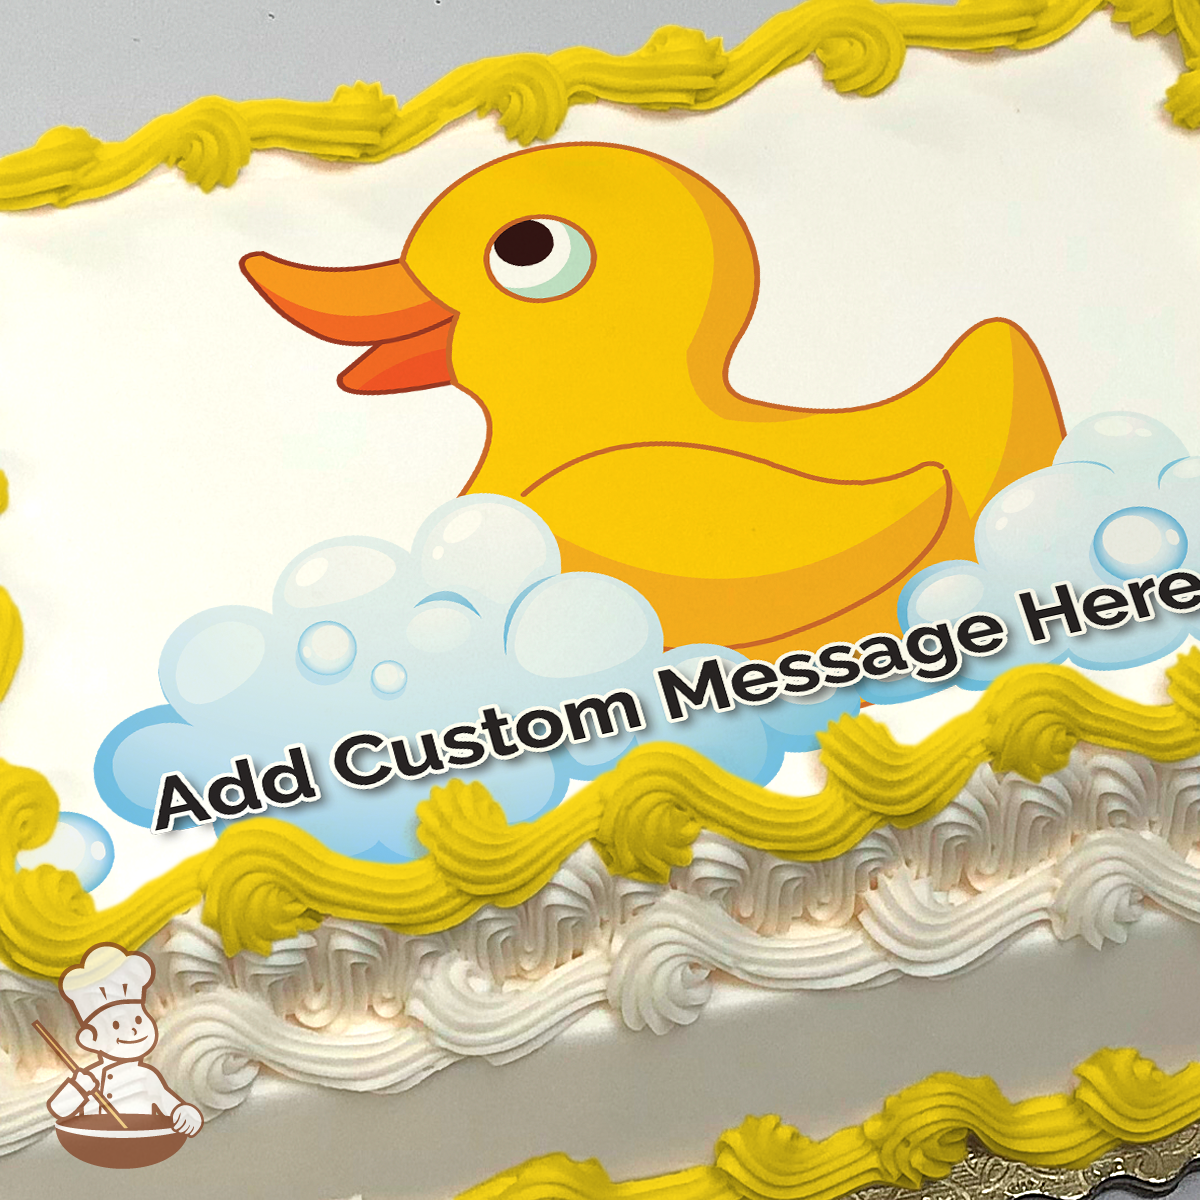 Rubber Duck Birthday Party » JessicaEtCetera.com | by Jessica Grant